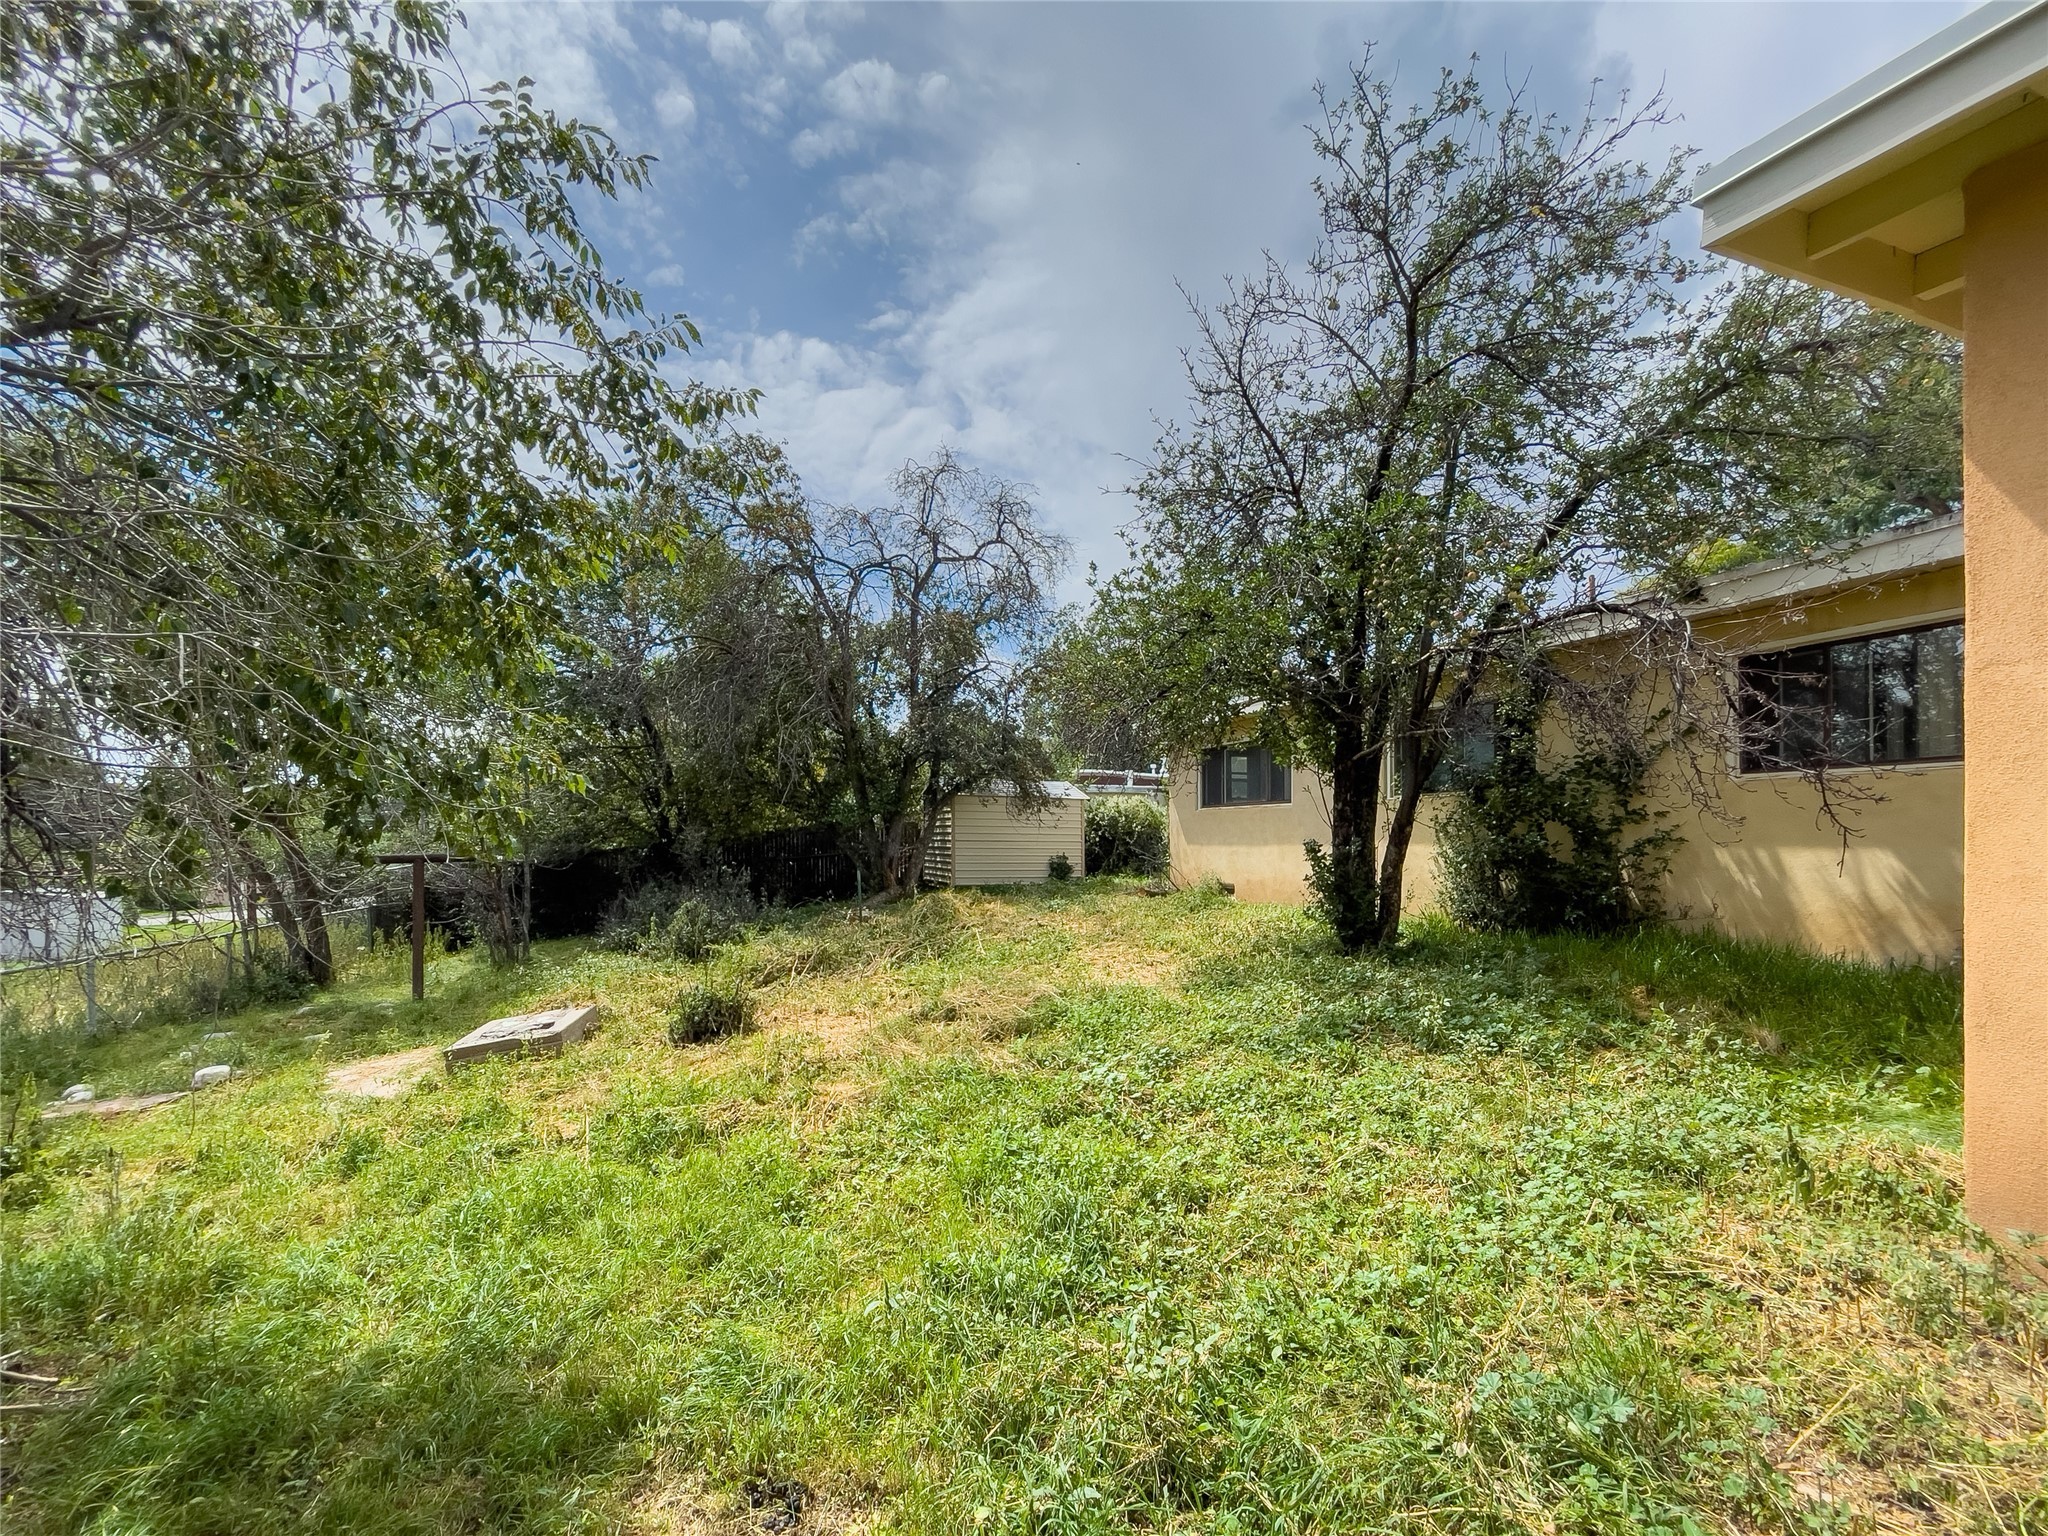 714 45th Street, Los Alamos, New Mexico 87544, 3 Bedrooms Bedrooms, ,2 BathroomsBathrooms,Residential,For Sale,714 45th Street,202233045